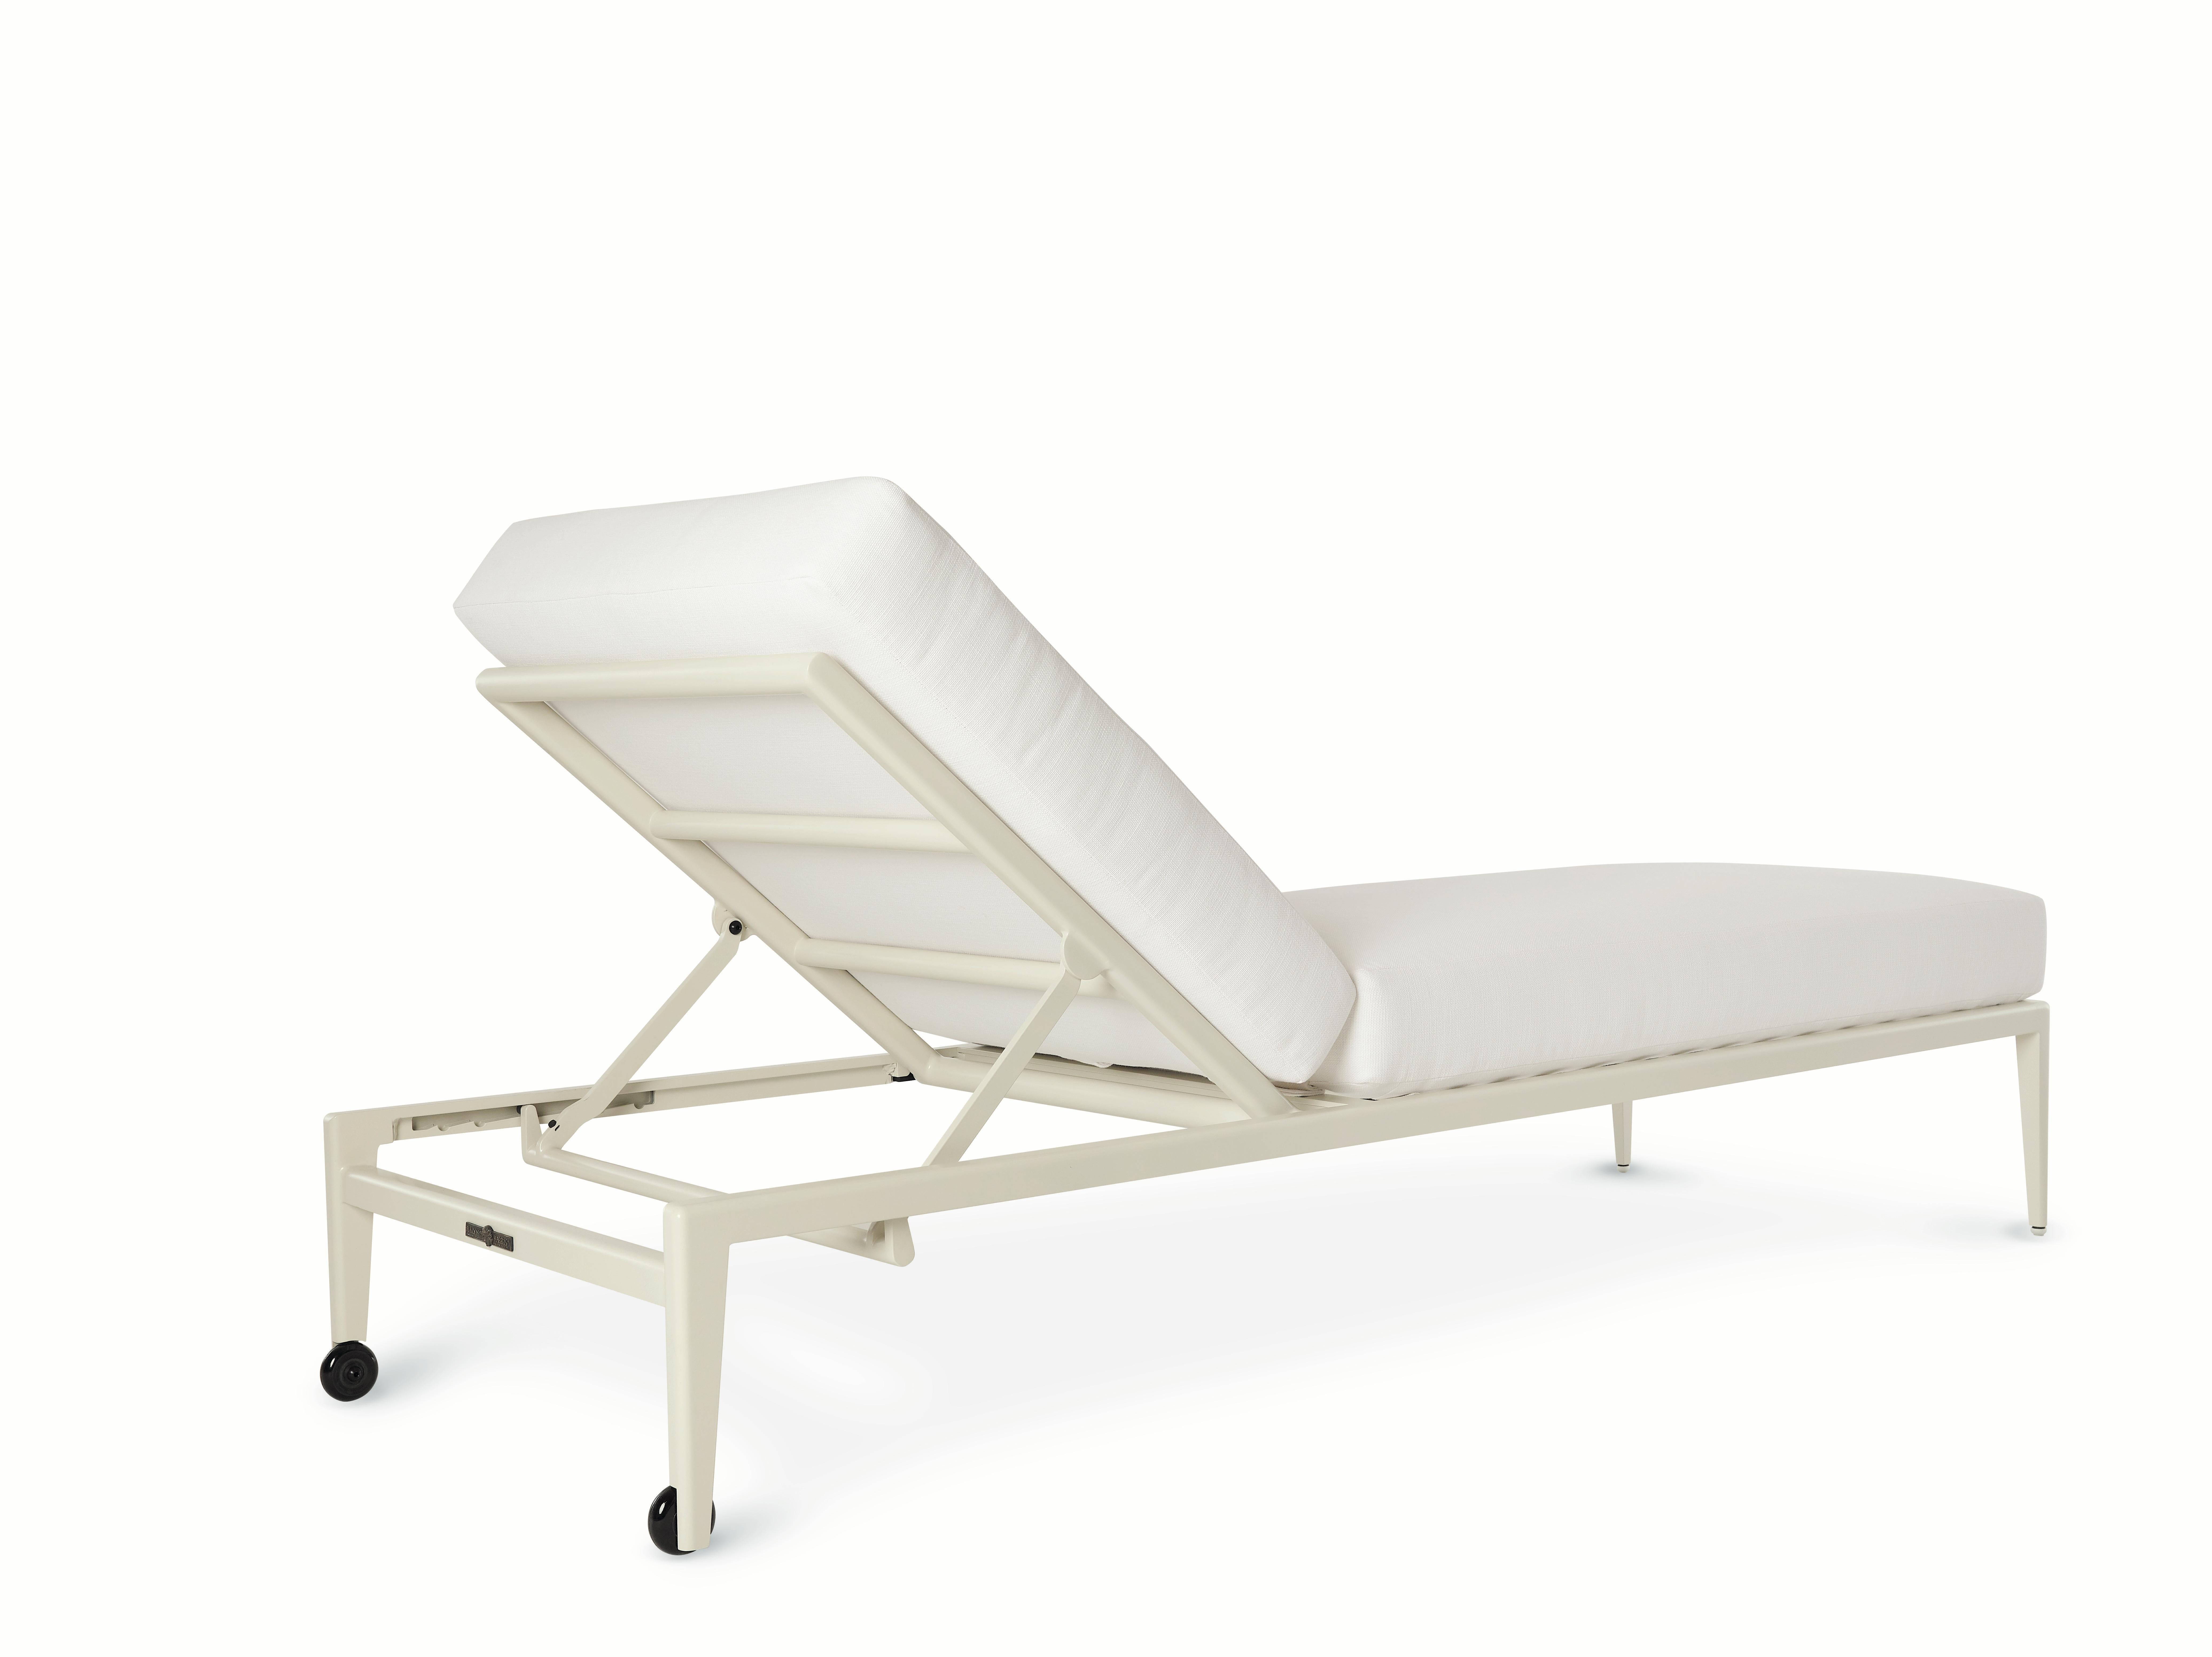 Welded McKinnon and Harris Outdoor Furniture deCamp Sun Chaise Classic White finish  For Sale